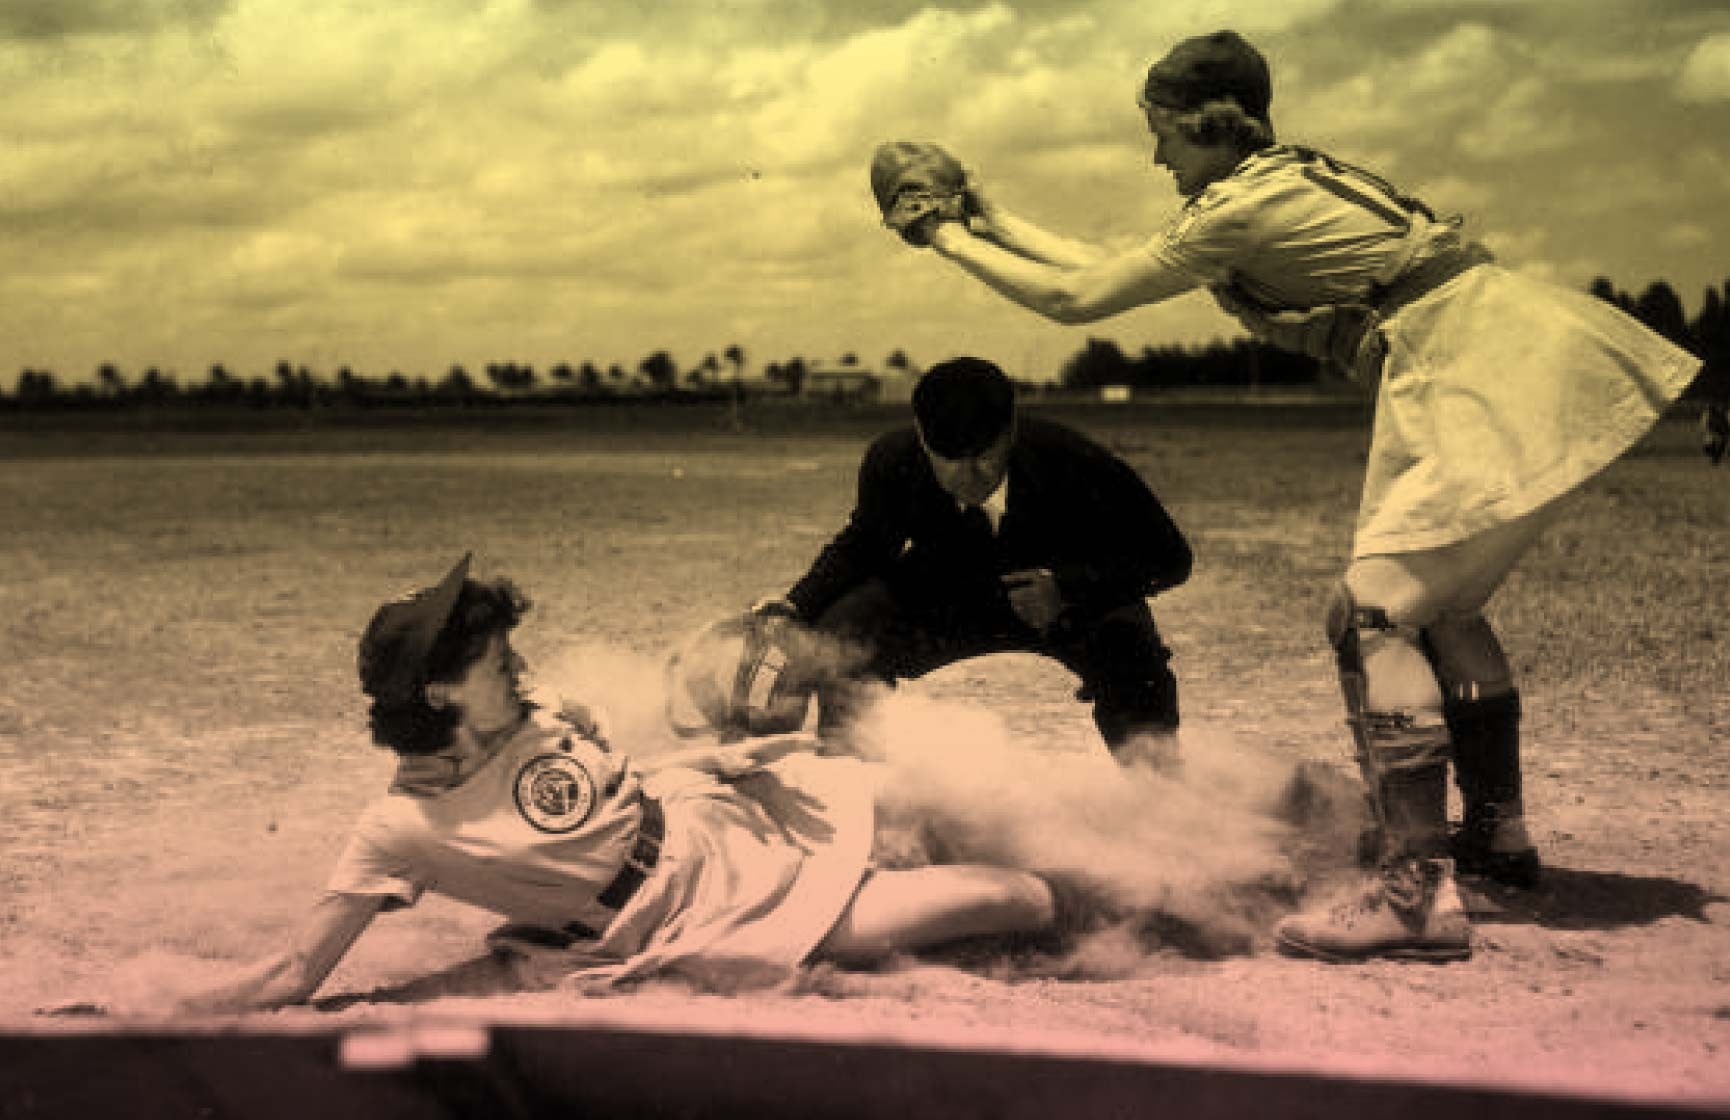 A 1948 photo of All American Girls Professional Baseball League player Marg Callaghan sliding into home plate